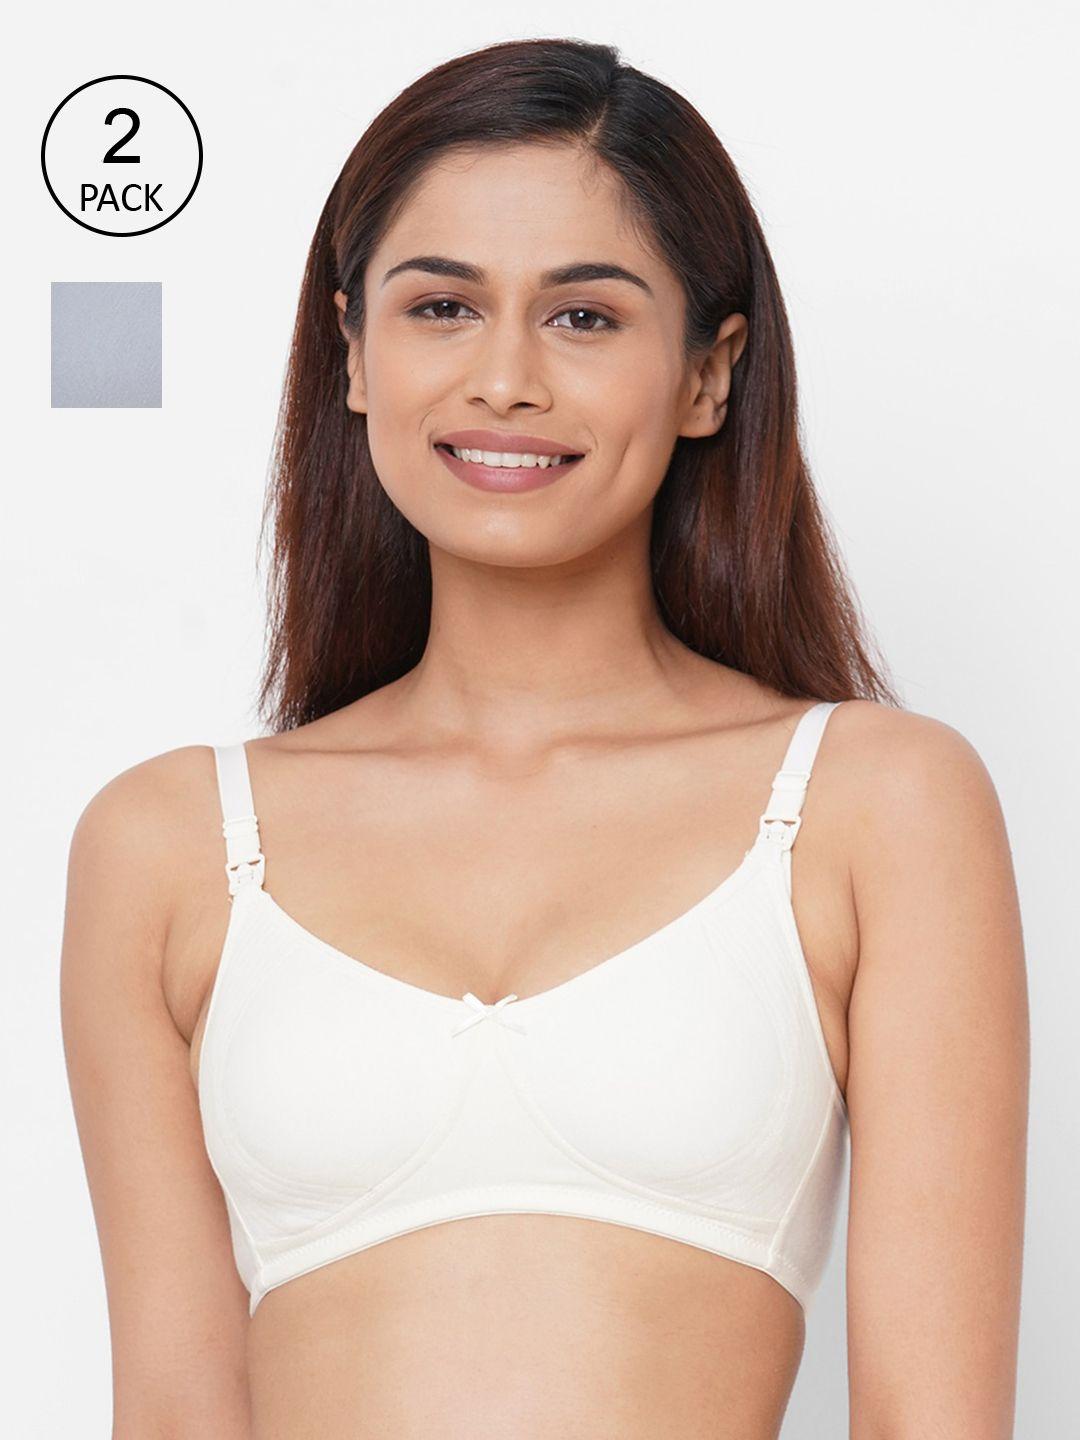 inner-sense-pack-of-2-solid-non-wired-antimicrobial-non-padded-maternity-sustainable-bra-imb005d_5f